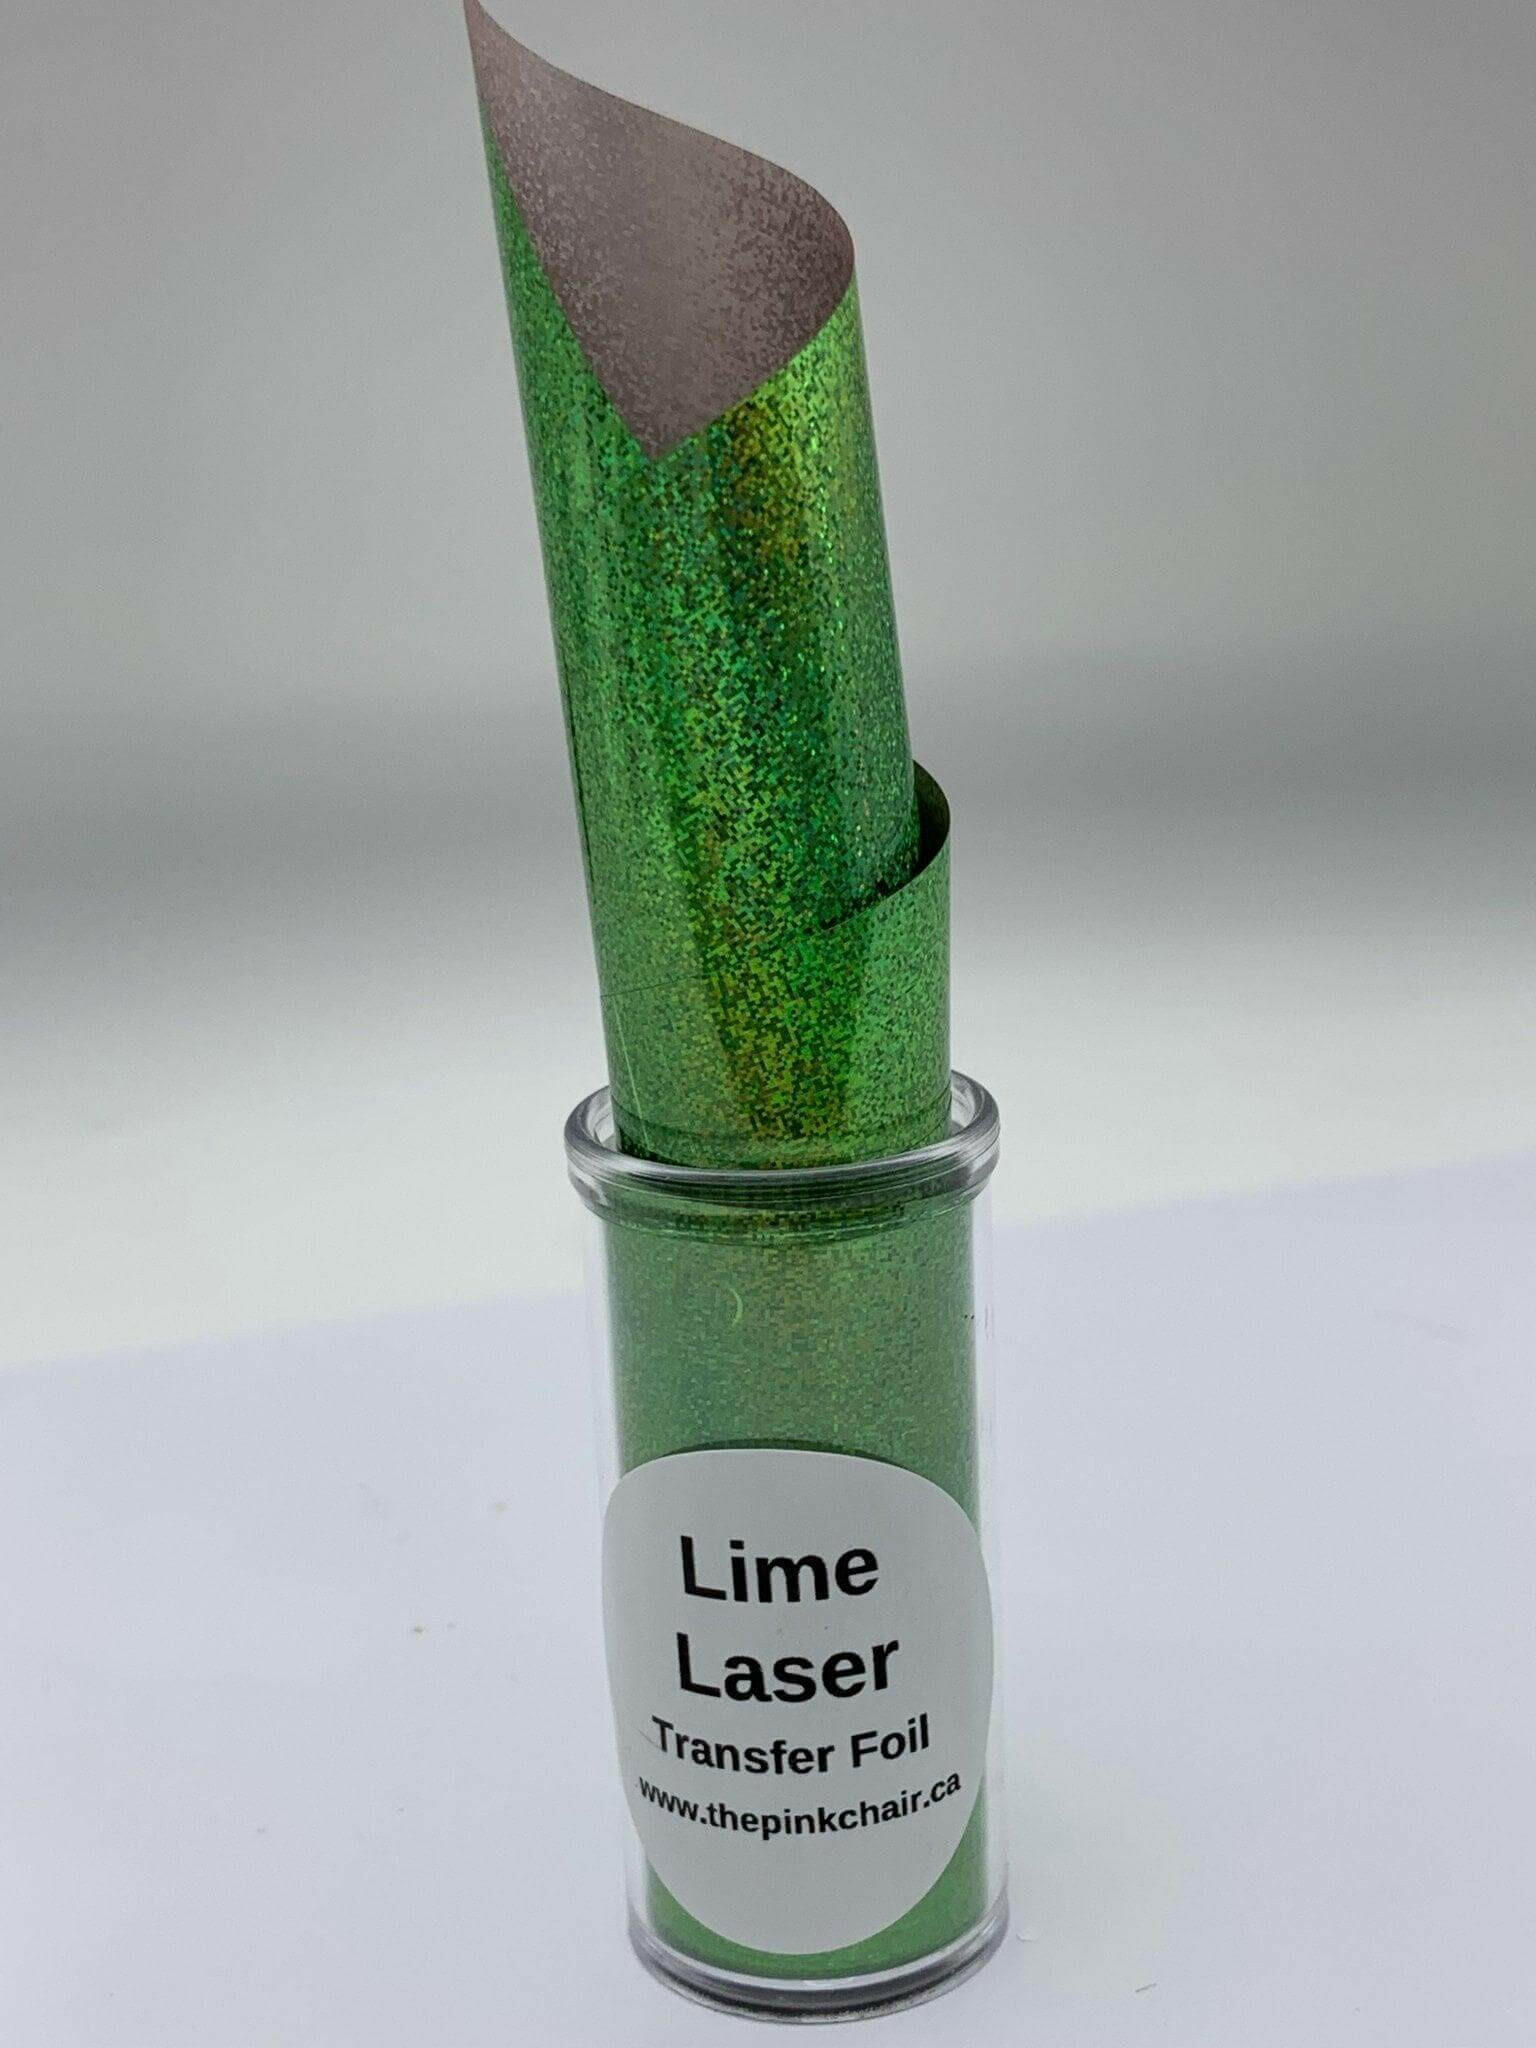 Lime Laser Transfer Foil - thePINKchair.ca - Nail Art - thePINKchair nail studio